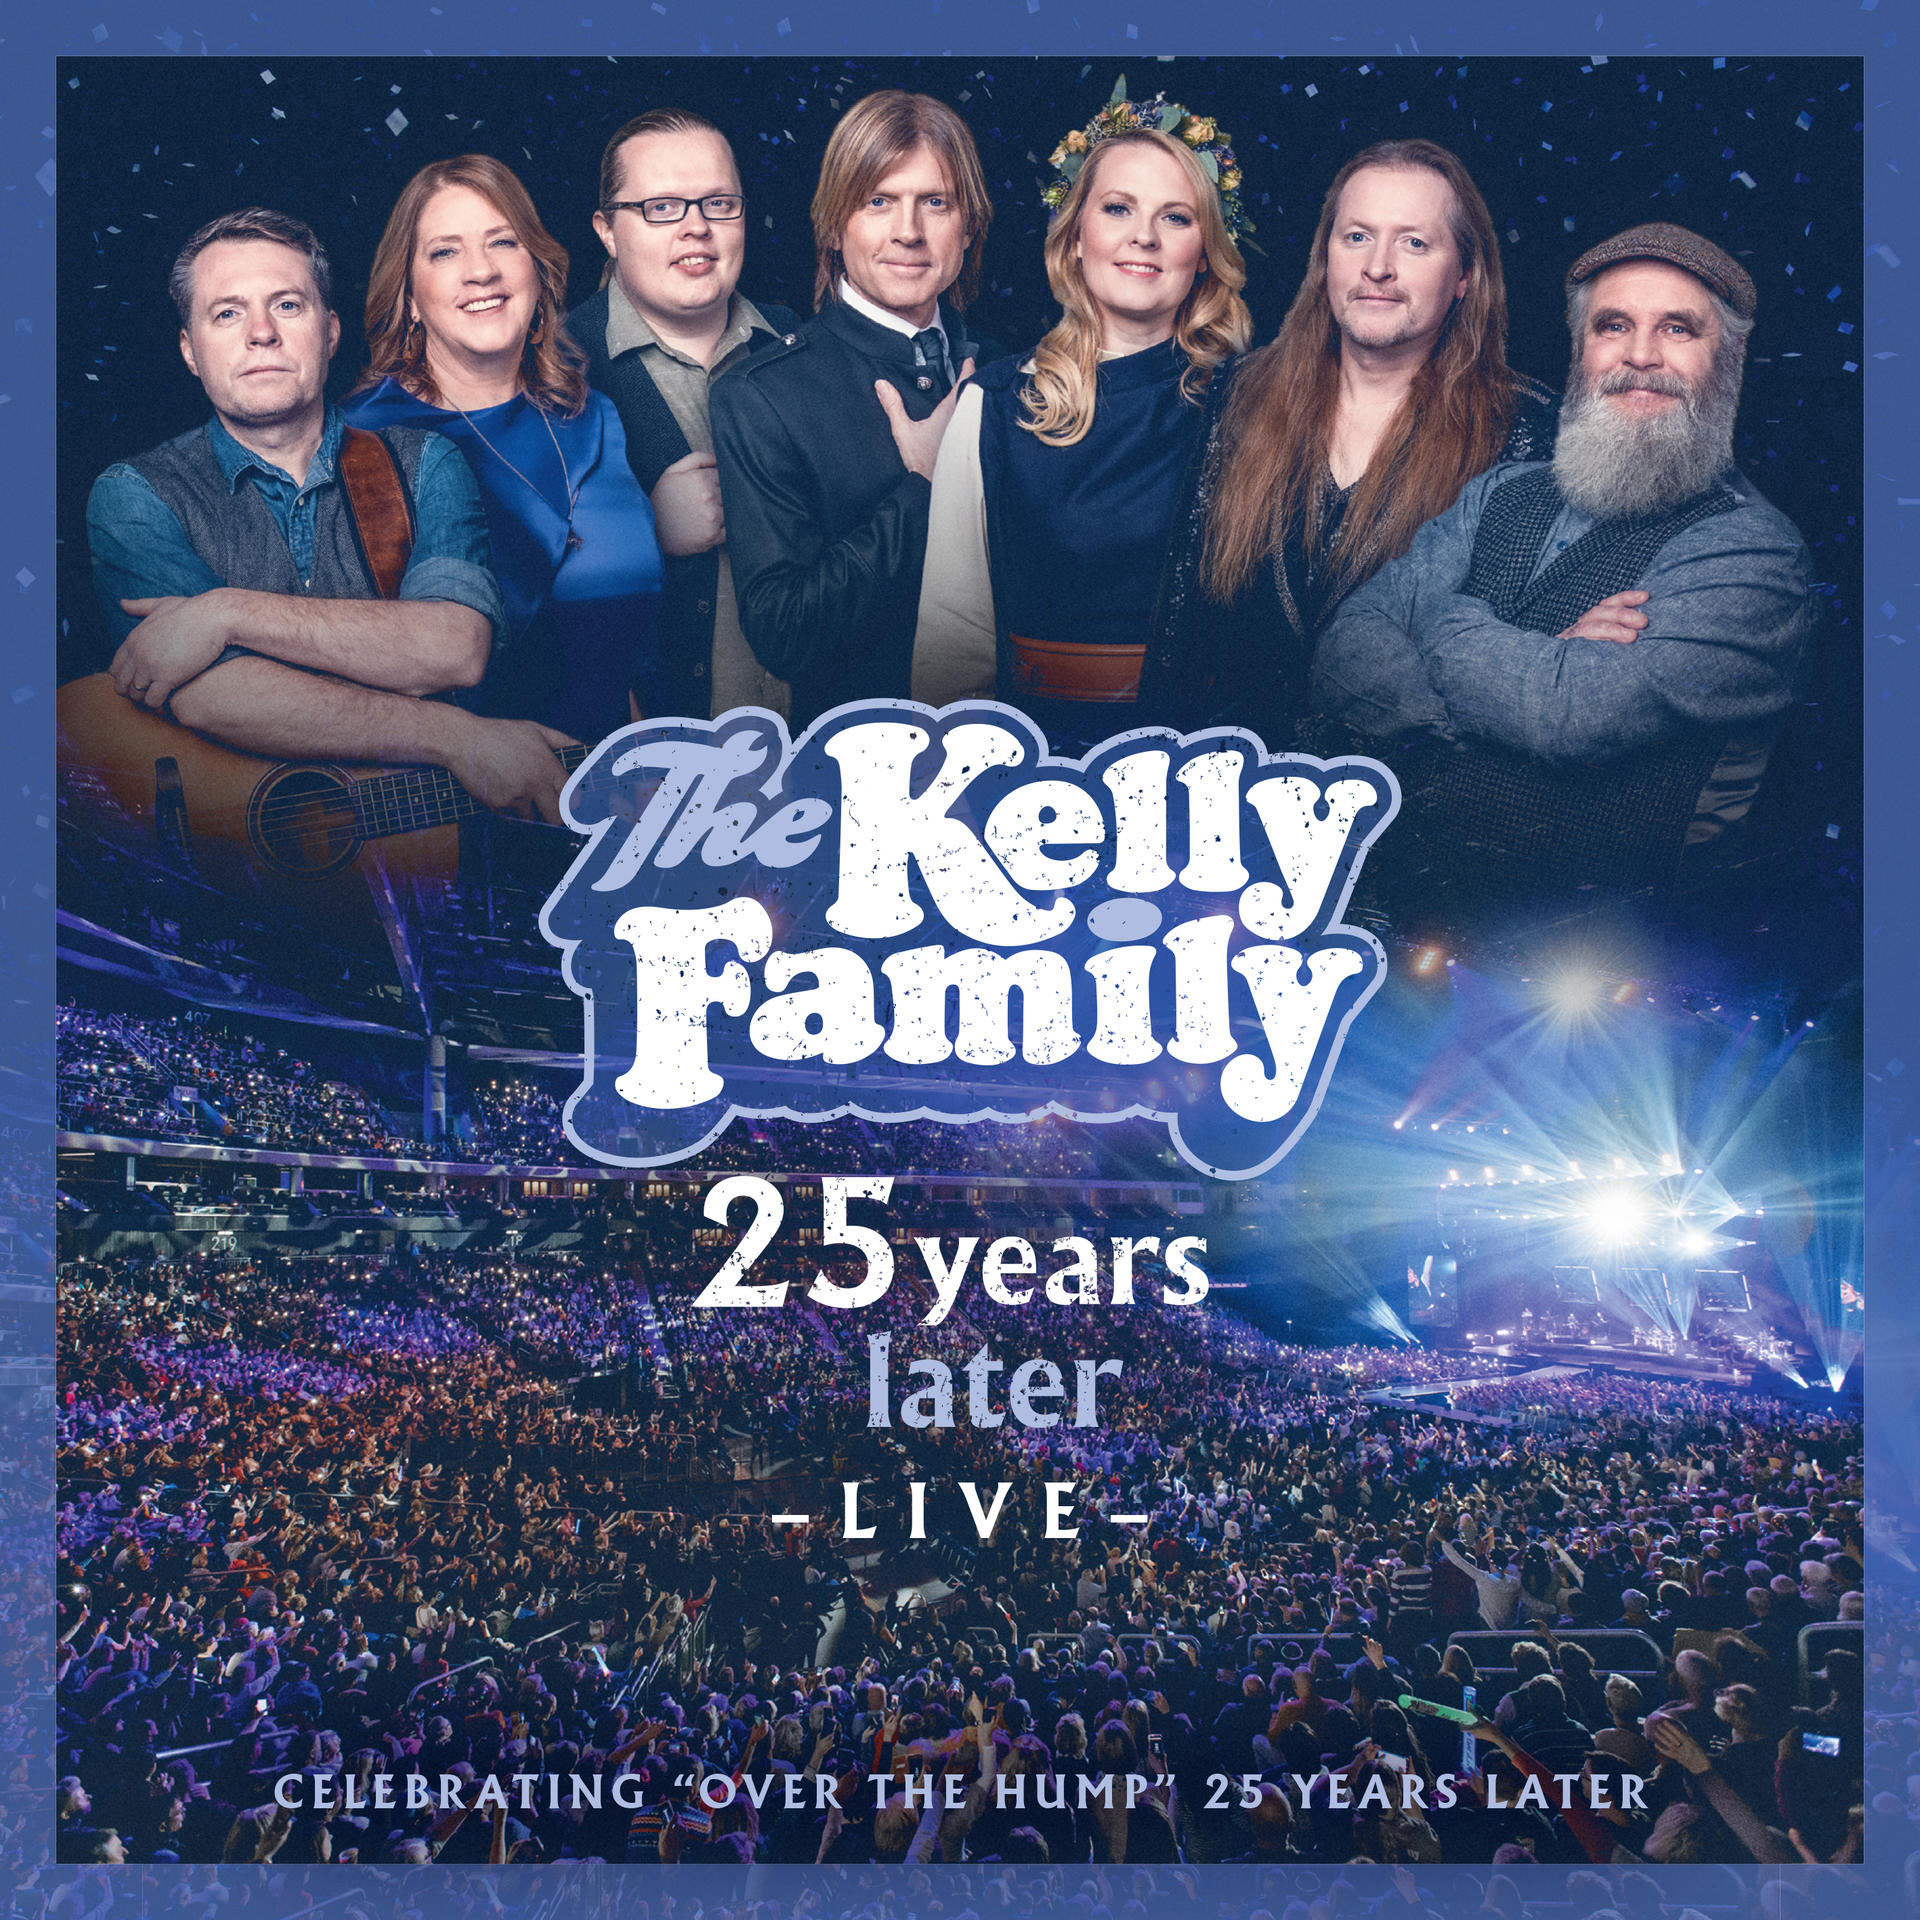 The Kelly Family - (Blu-ray) Years Later-Live 25 